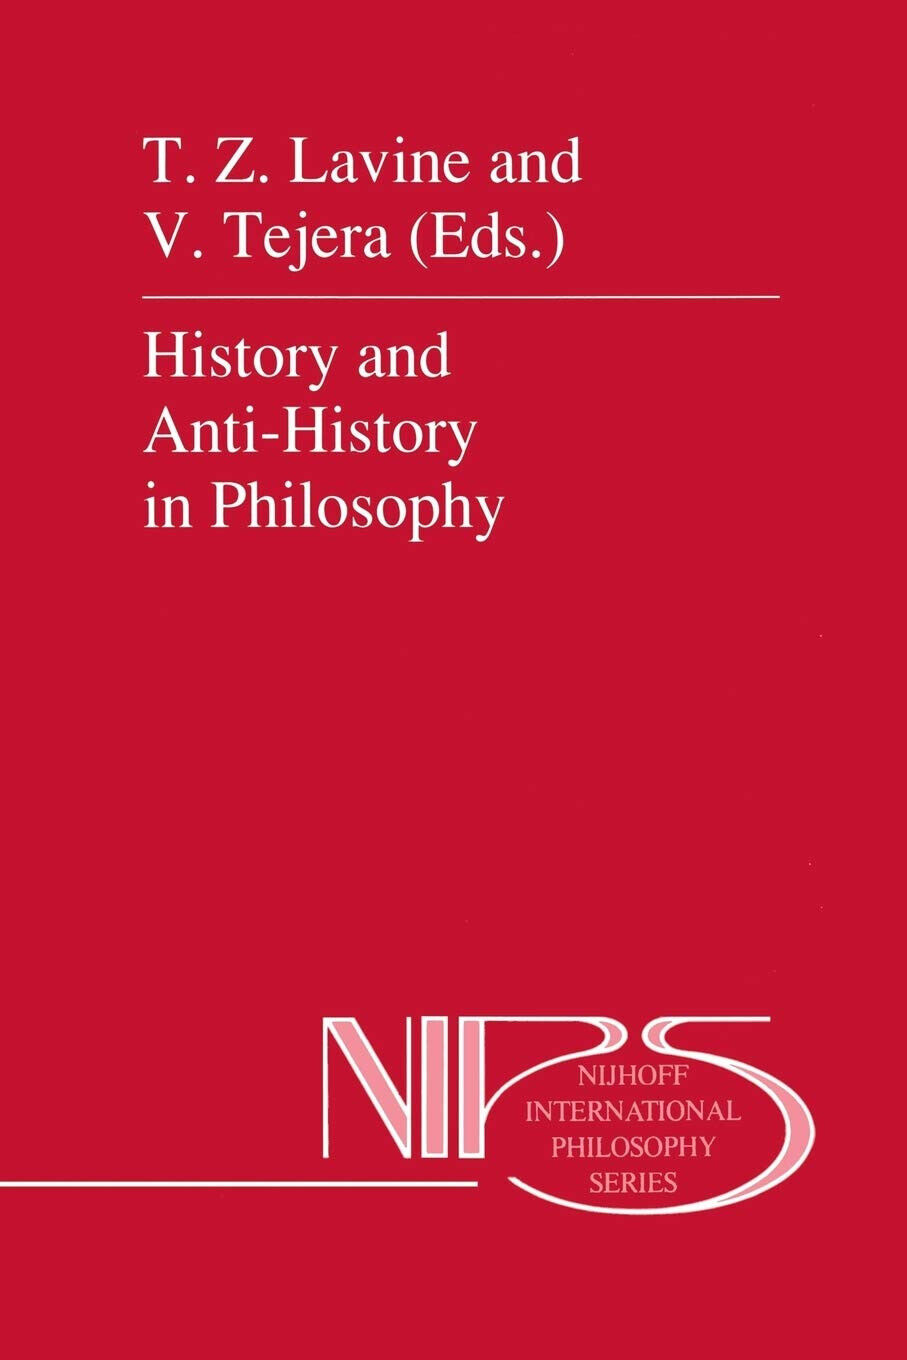 History and Anti-History in Philosophy - V. Tejera - Springer, 2013